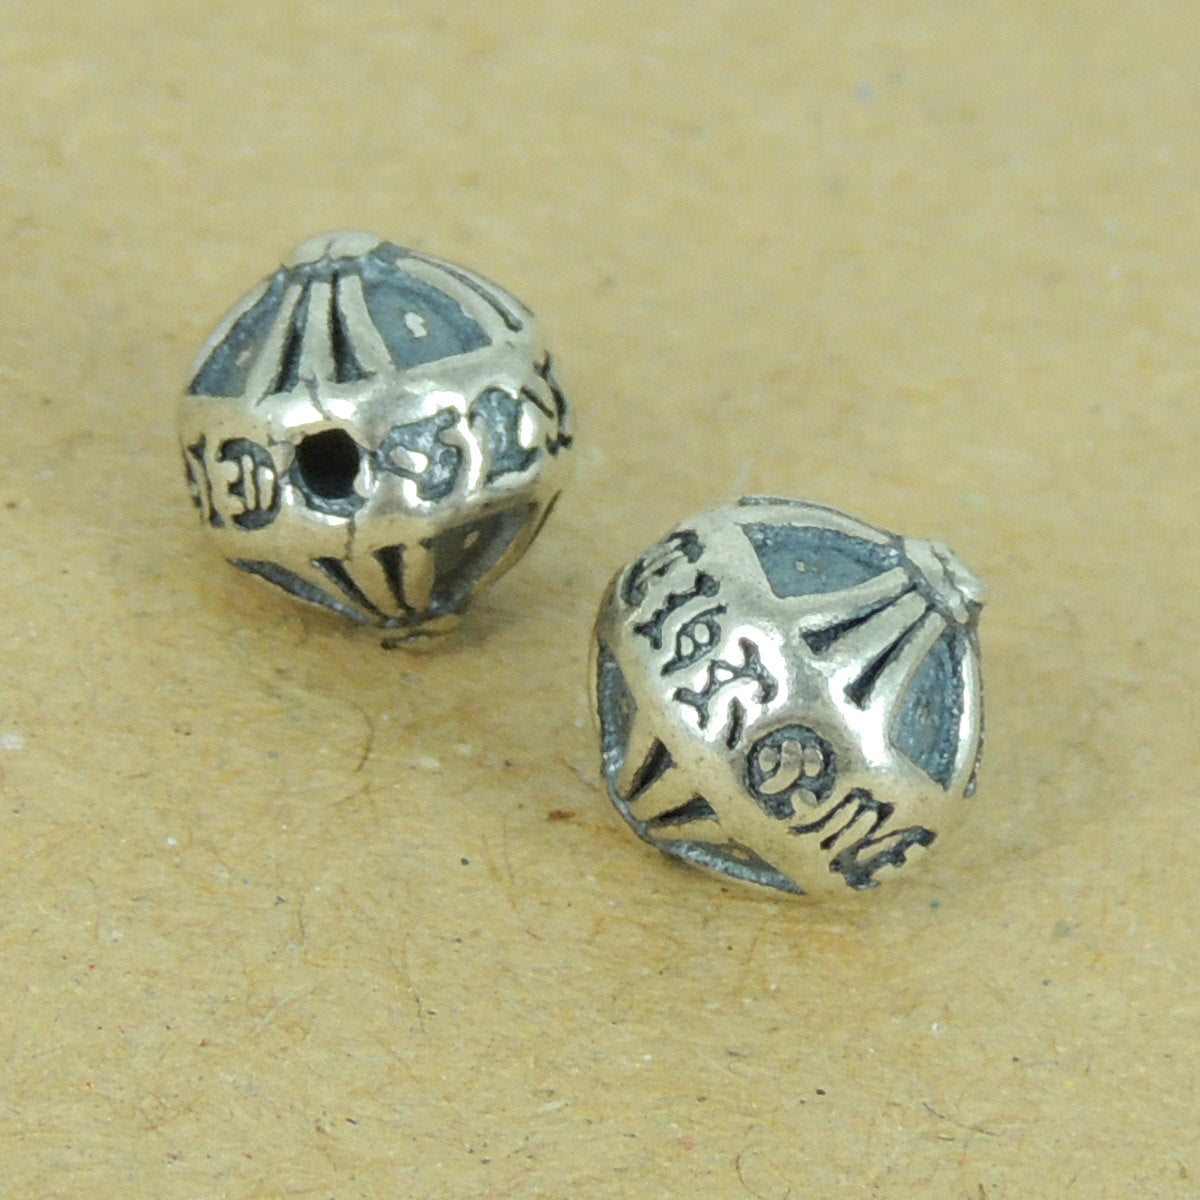 2 PCS Vintage Round Gothic Cross Beads - S925 Sterling Silver WSP337X2